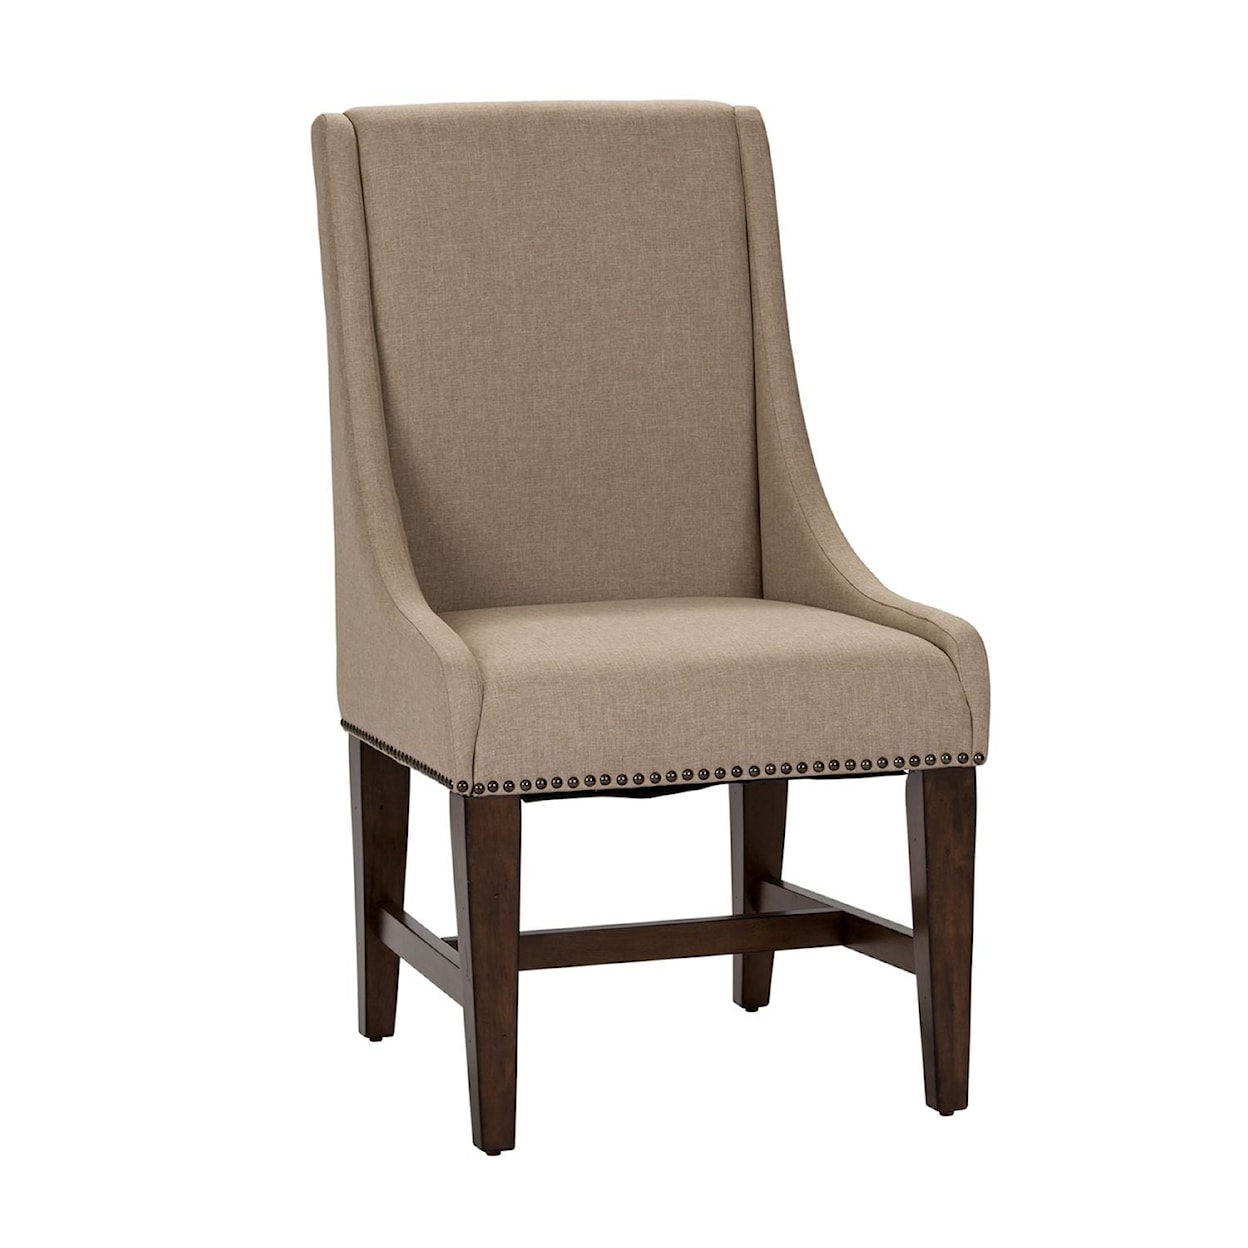 Liberty Furniture Armand Upholstered Side Chair